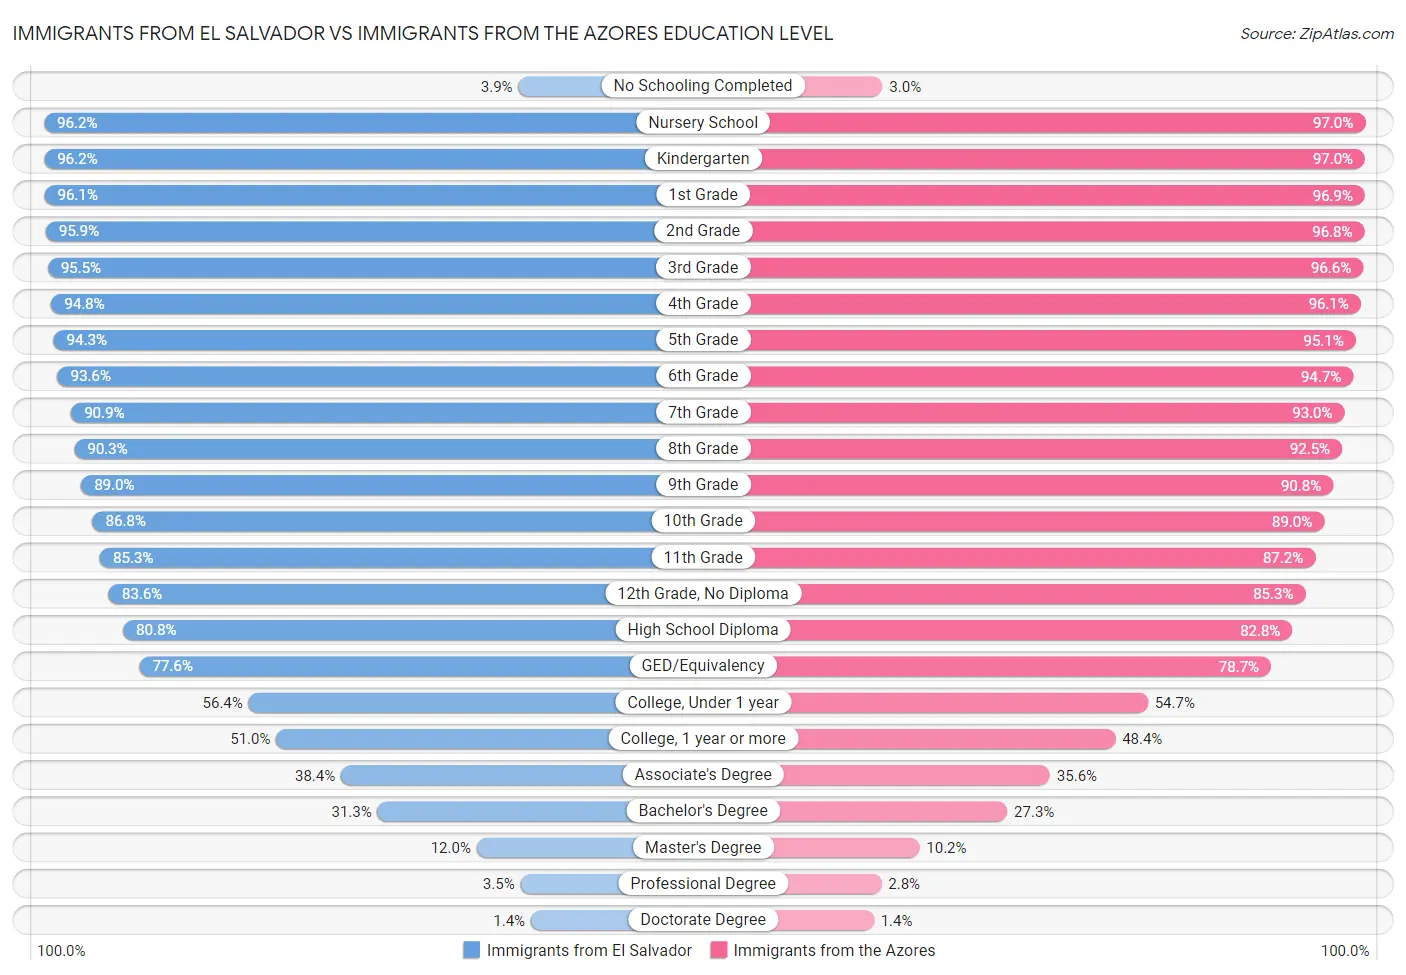 Immigrants from El Salvador vs Immigrants from the Azores Education Level